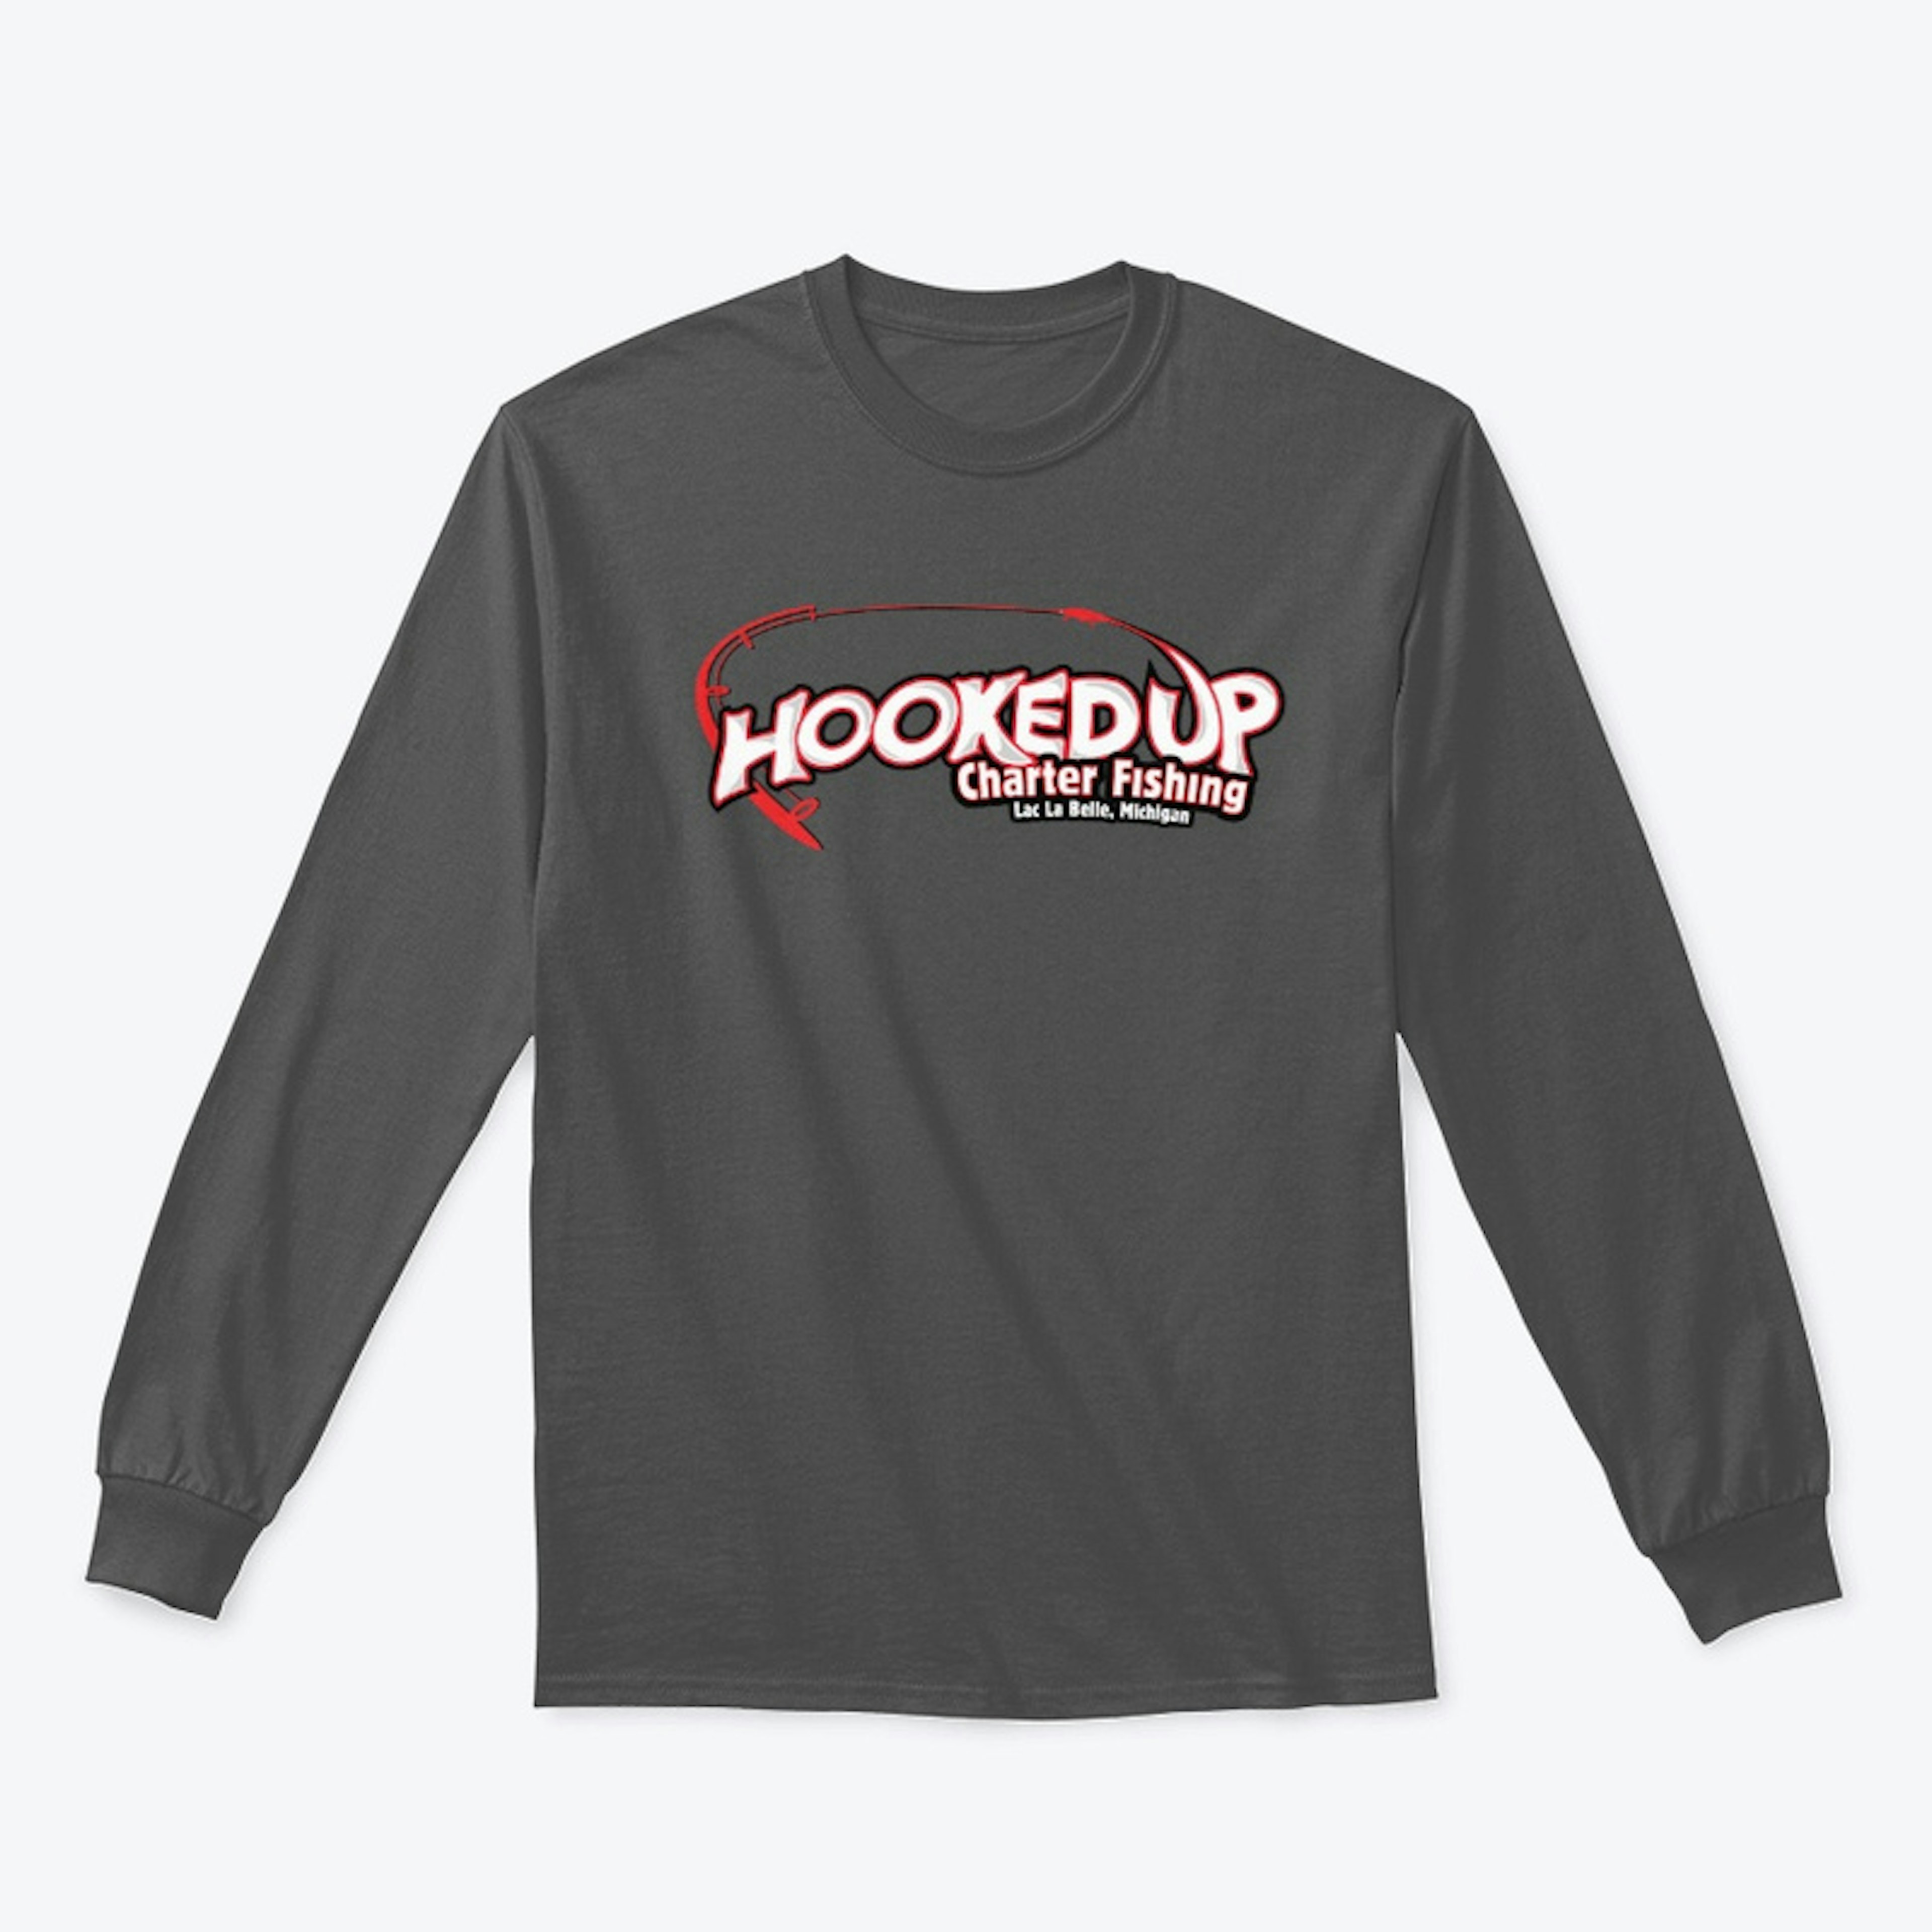 Hooked UP Charter L/S Tee 4 Color Logo